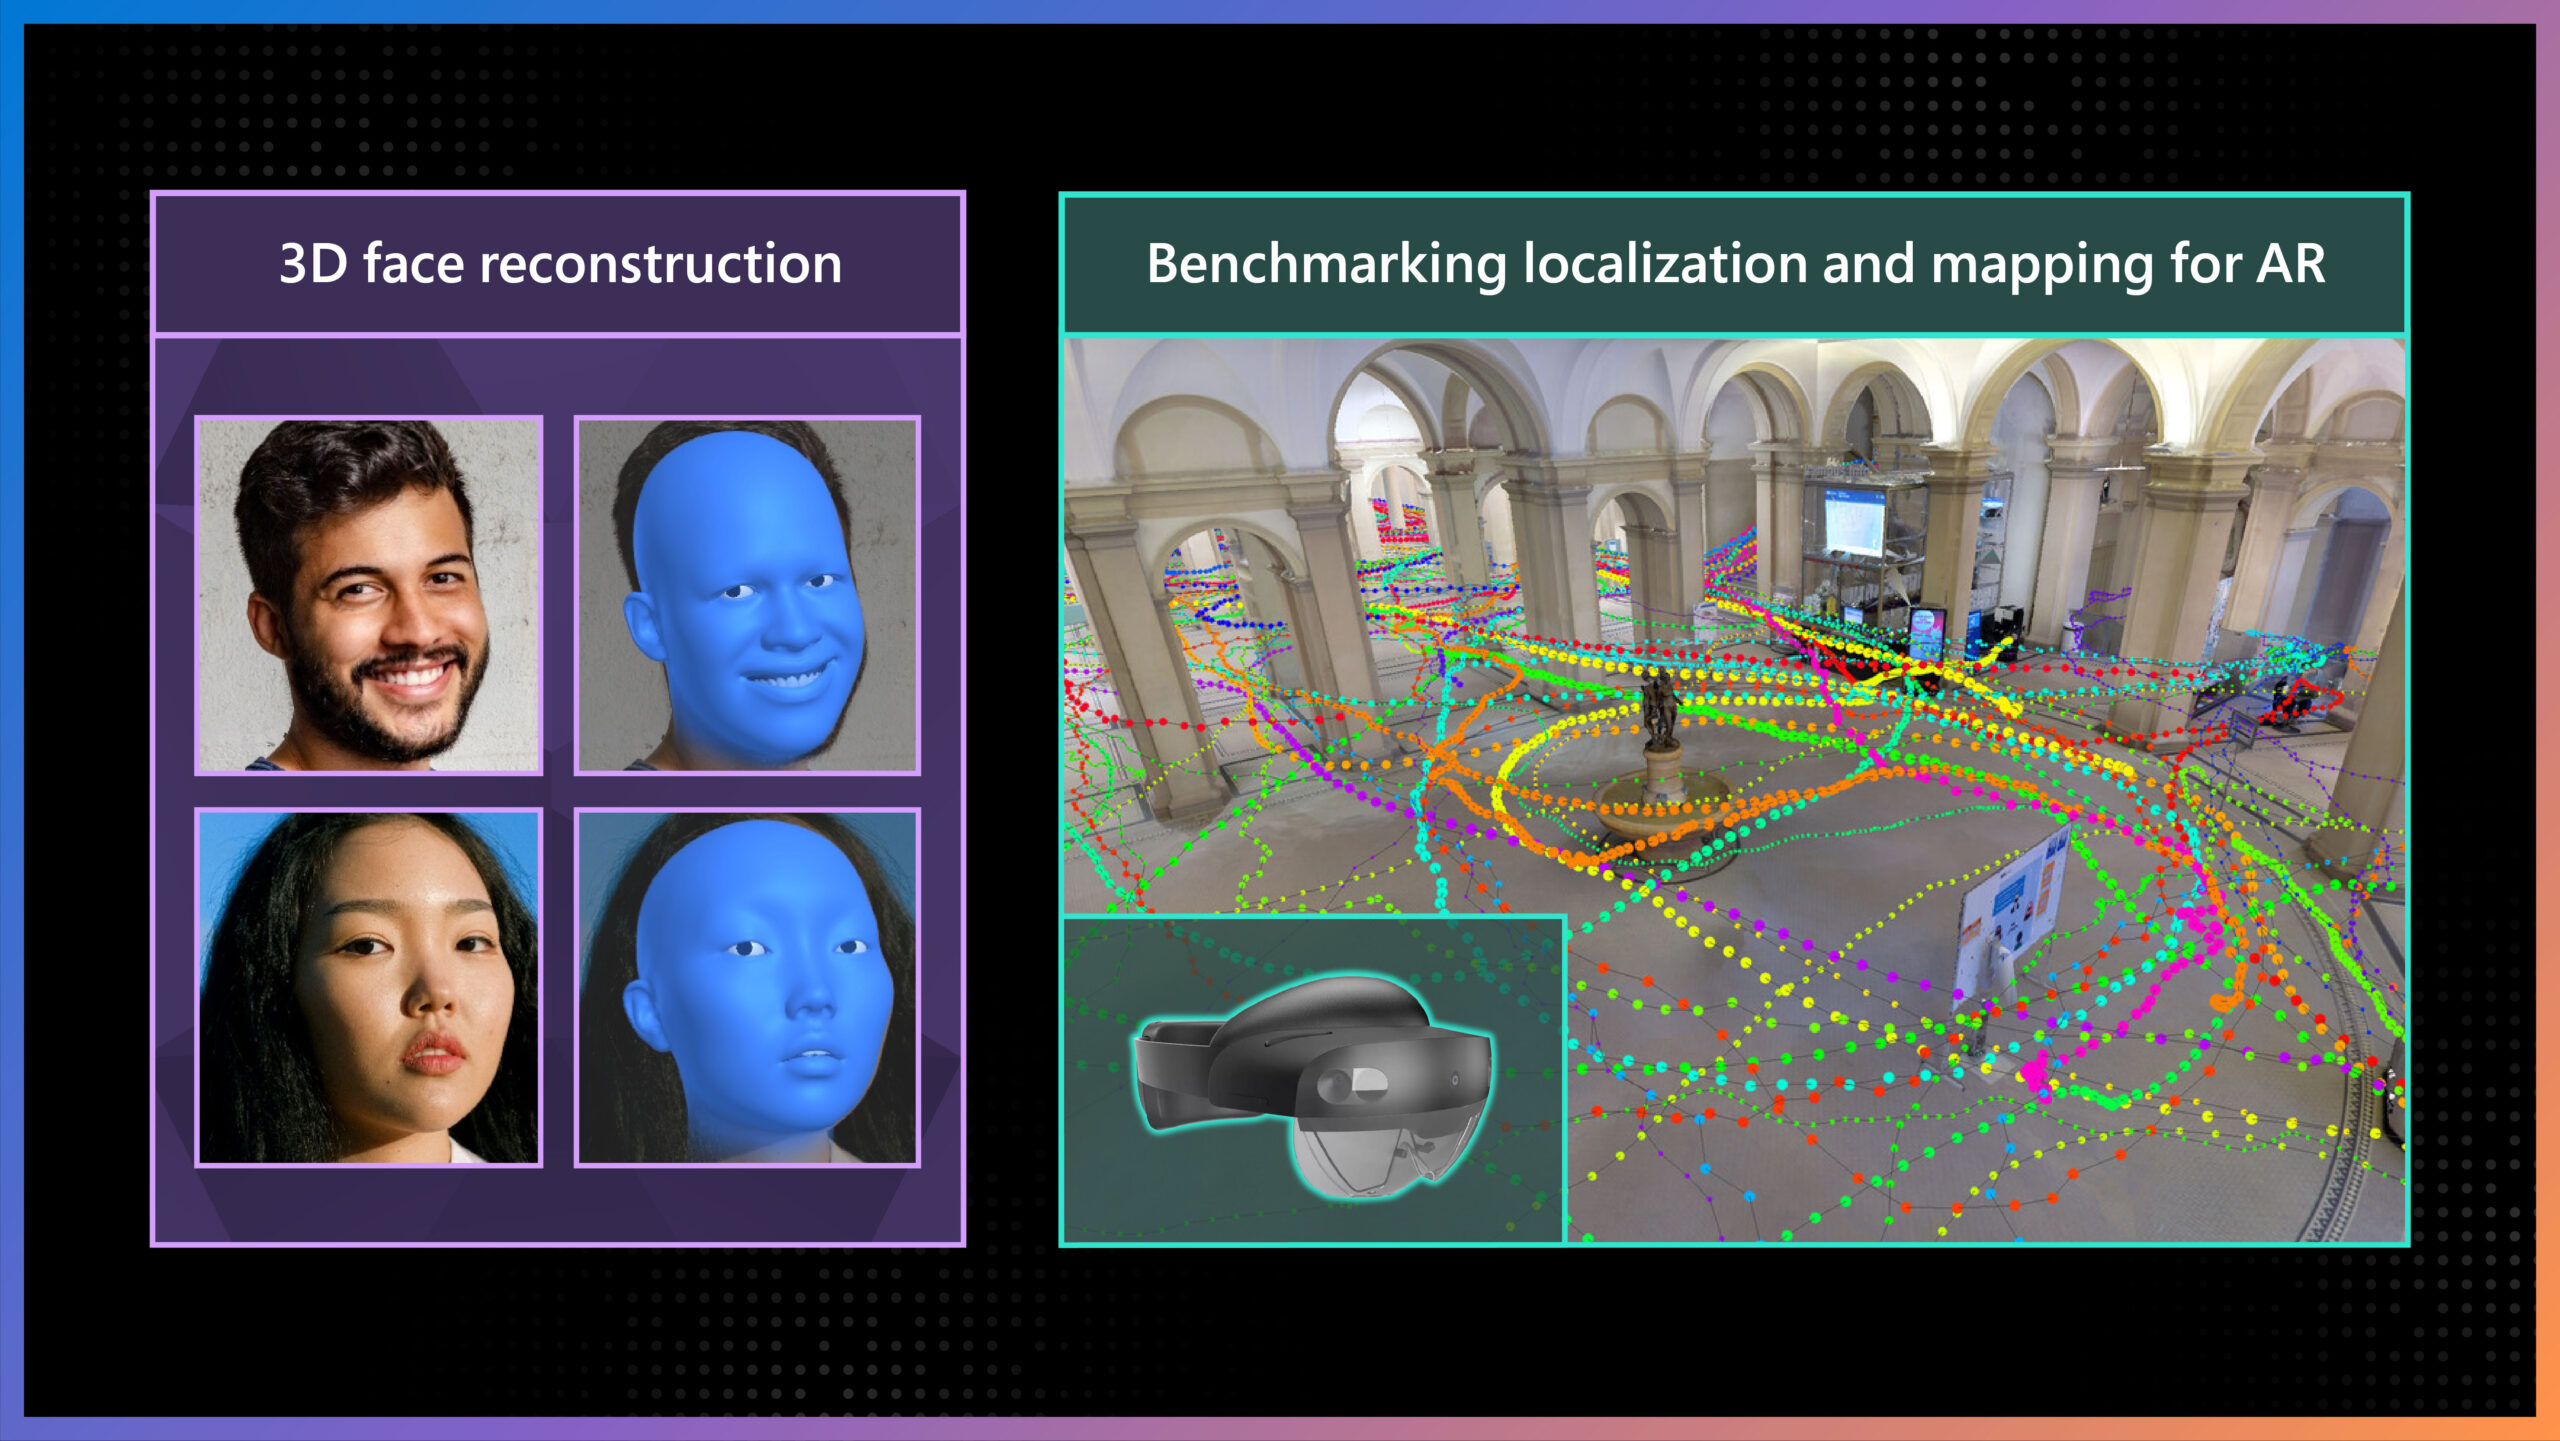 This image contains two panels. The panel on the left is titled “3D face reconstruction” and depicts two faces of real people and corresponding face models developed using the dense landmarks method with 703 facial landmarks. The panel on the right is titled “Benchmarking localization and mapping for AR” and shows the interior of a building with paths—or sequences—where people had captured the environment using Microsoft HoloLens.